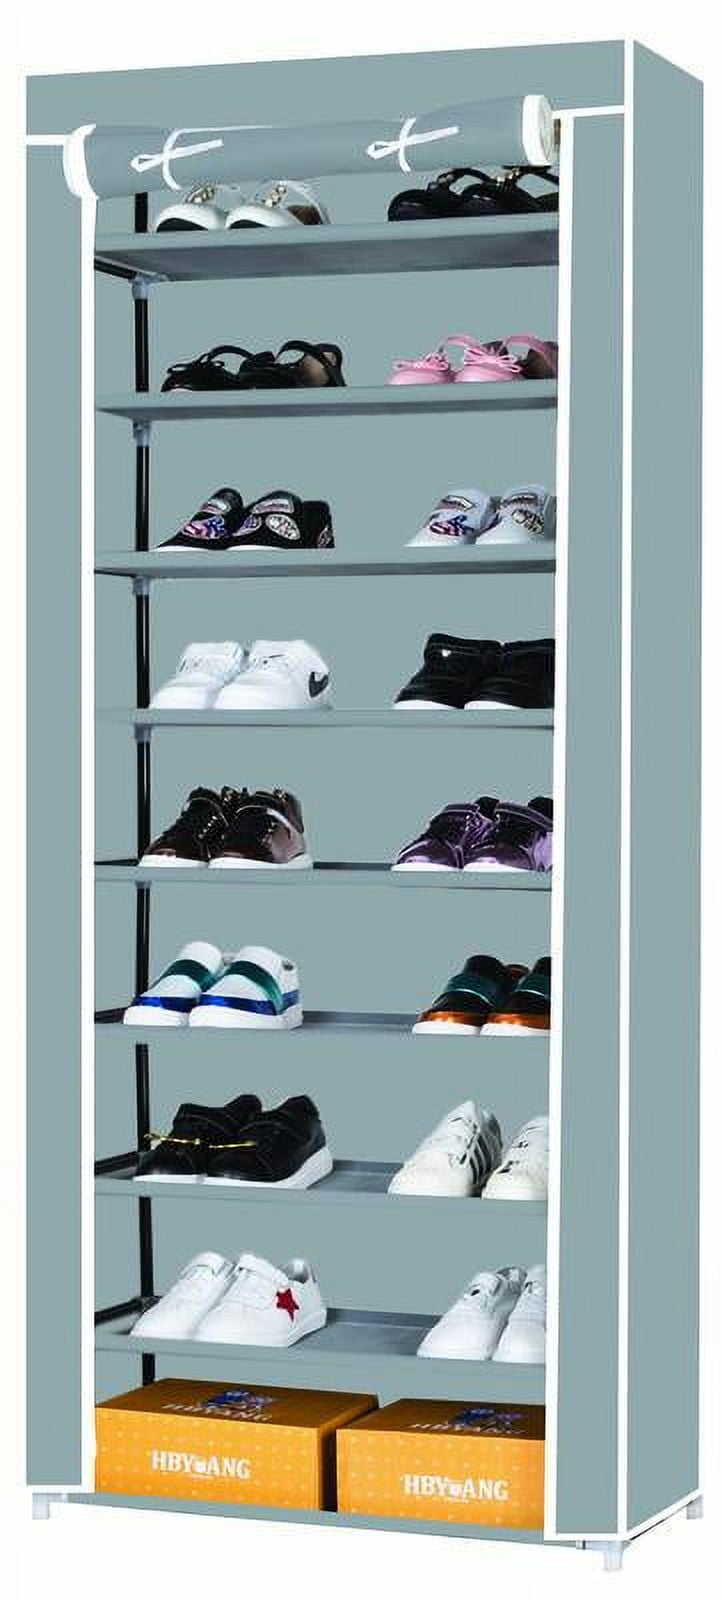 HONEIER 9 Tier Shoe Rack, Shoe Organizer with Nonwoven Fabric Cover, Shoe  Storage Shelf for 27 Pairs of Shoes, Free Standing Shoe Shelf Cabinet for  Entryway, Closet, Garage, Bedroom, Cloakroom 